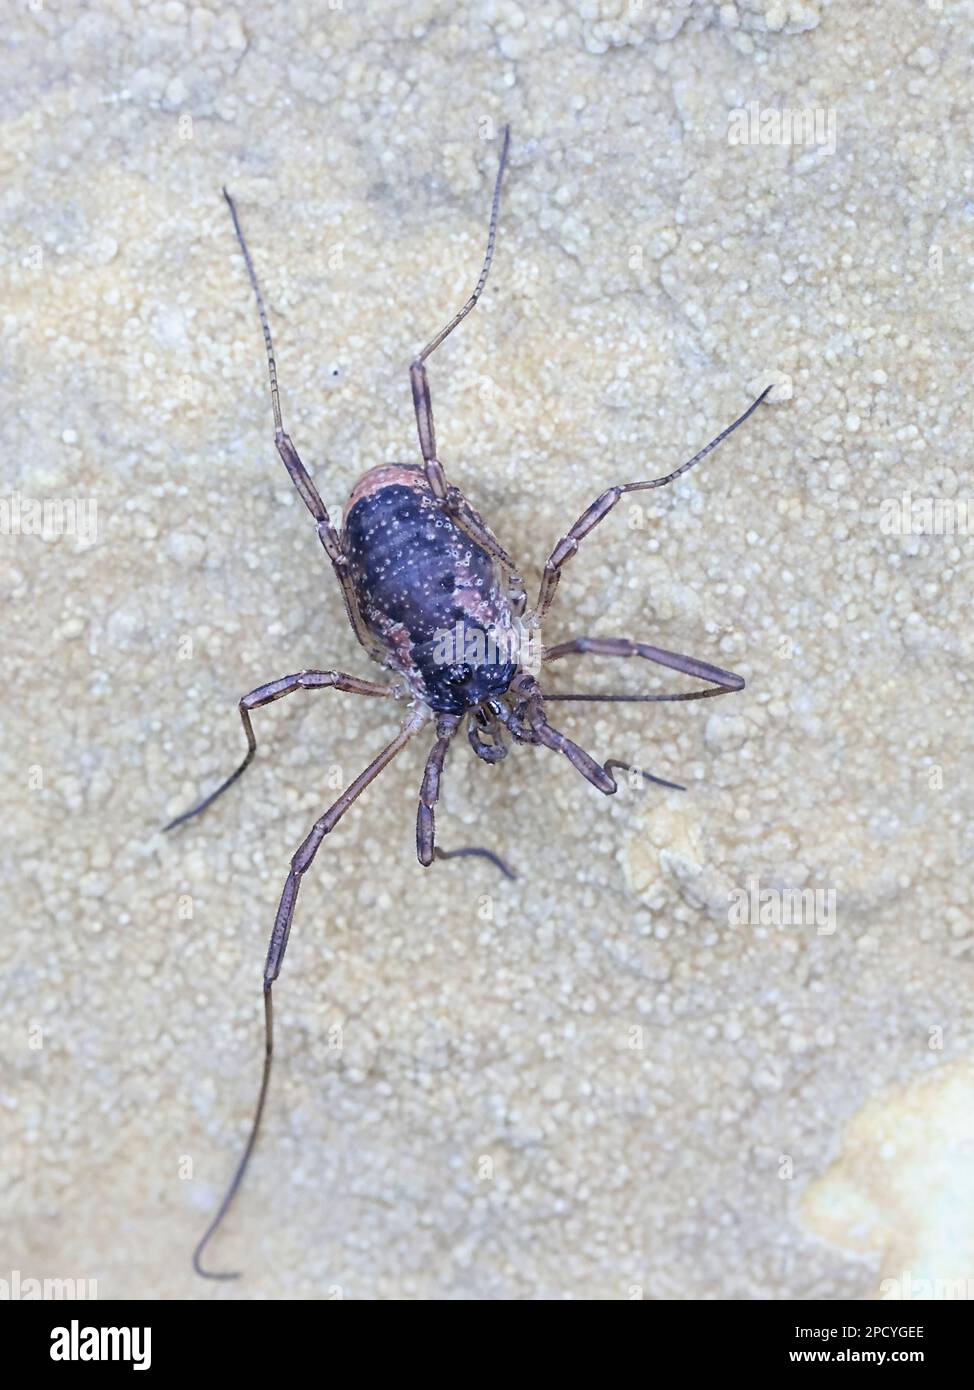 Mitopus morio, a harvestman species, also called harvesters, harvest spiders, or daddy longlegs Stock Photo